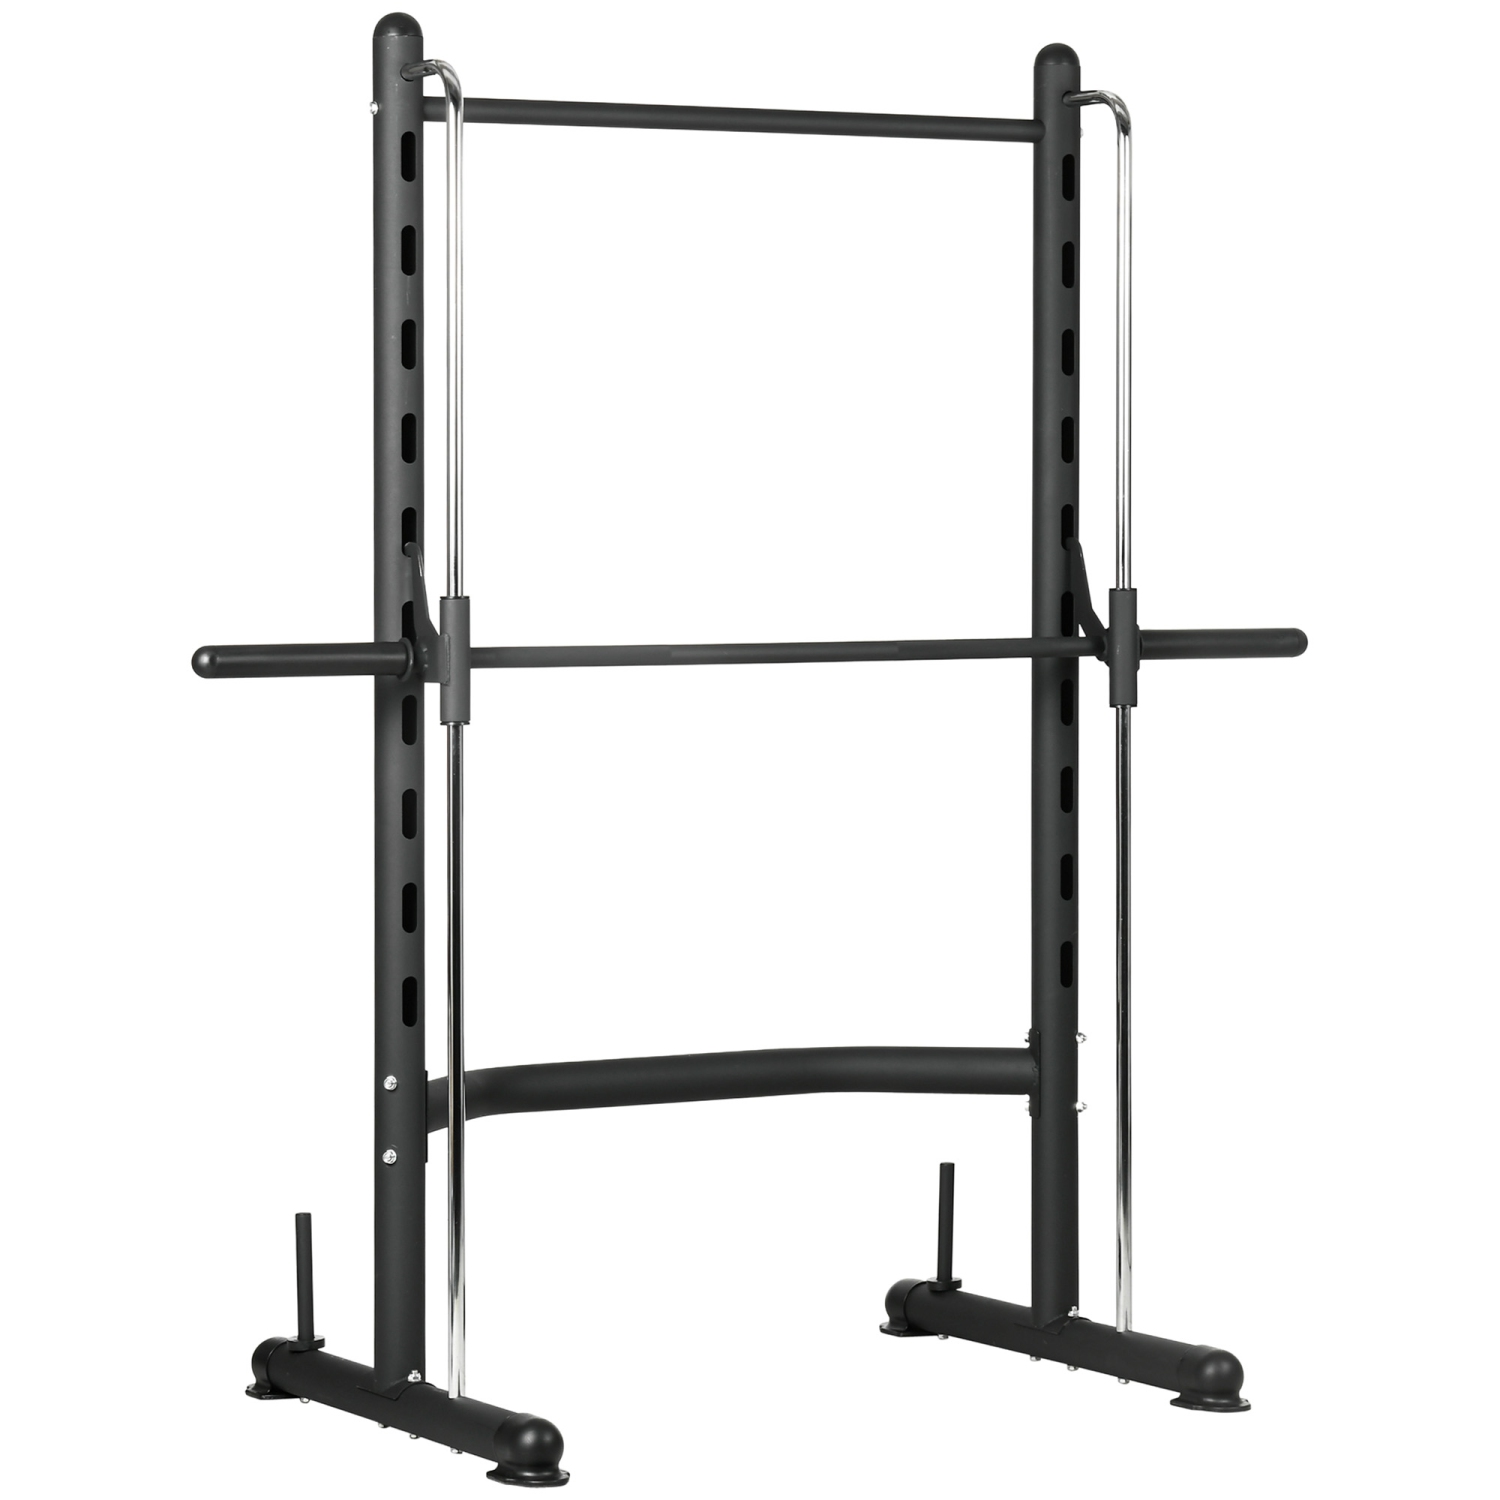 Soozier Adjustable Squat Rack with Pull Up Bar and Barbell Bar, Multi-Function Weight Lifting Half Rack for Home Gym Strength Training